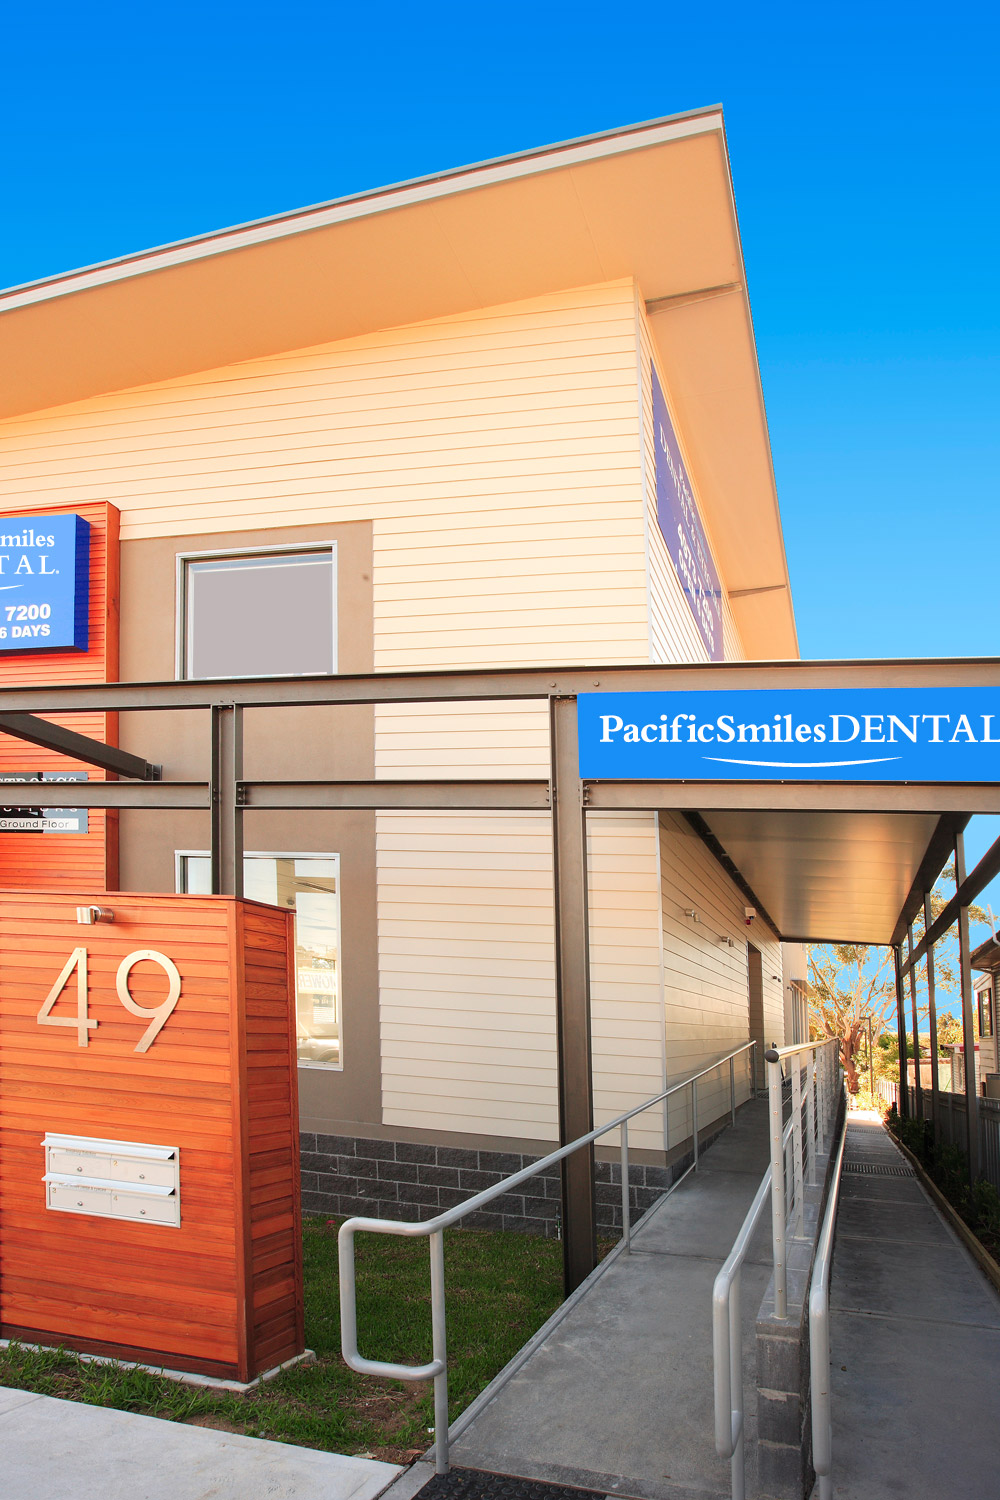 Pacific Smiles Dental | 49 Yambo Street, Morisset, New South Wales 2264 | +61 2 4973 7200